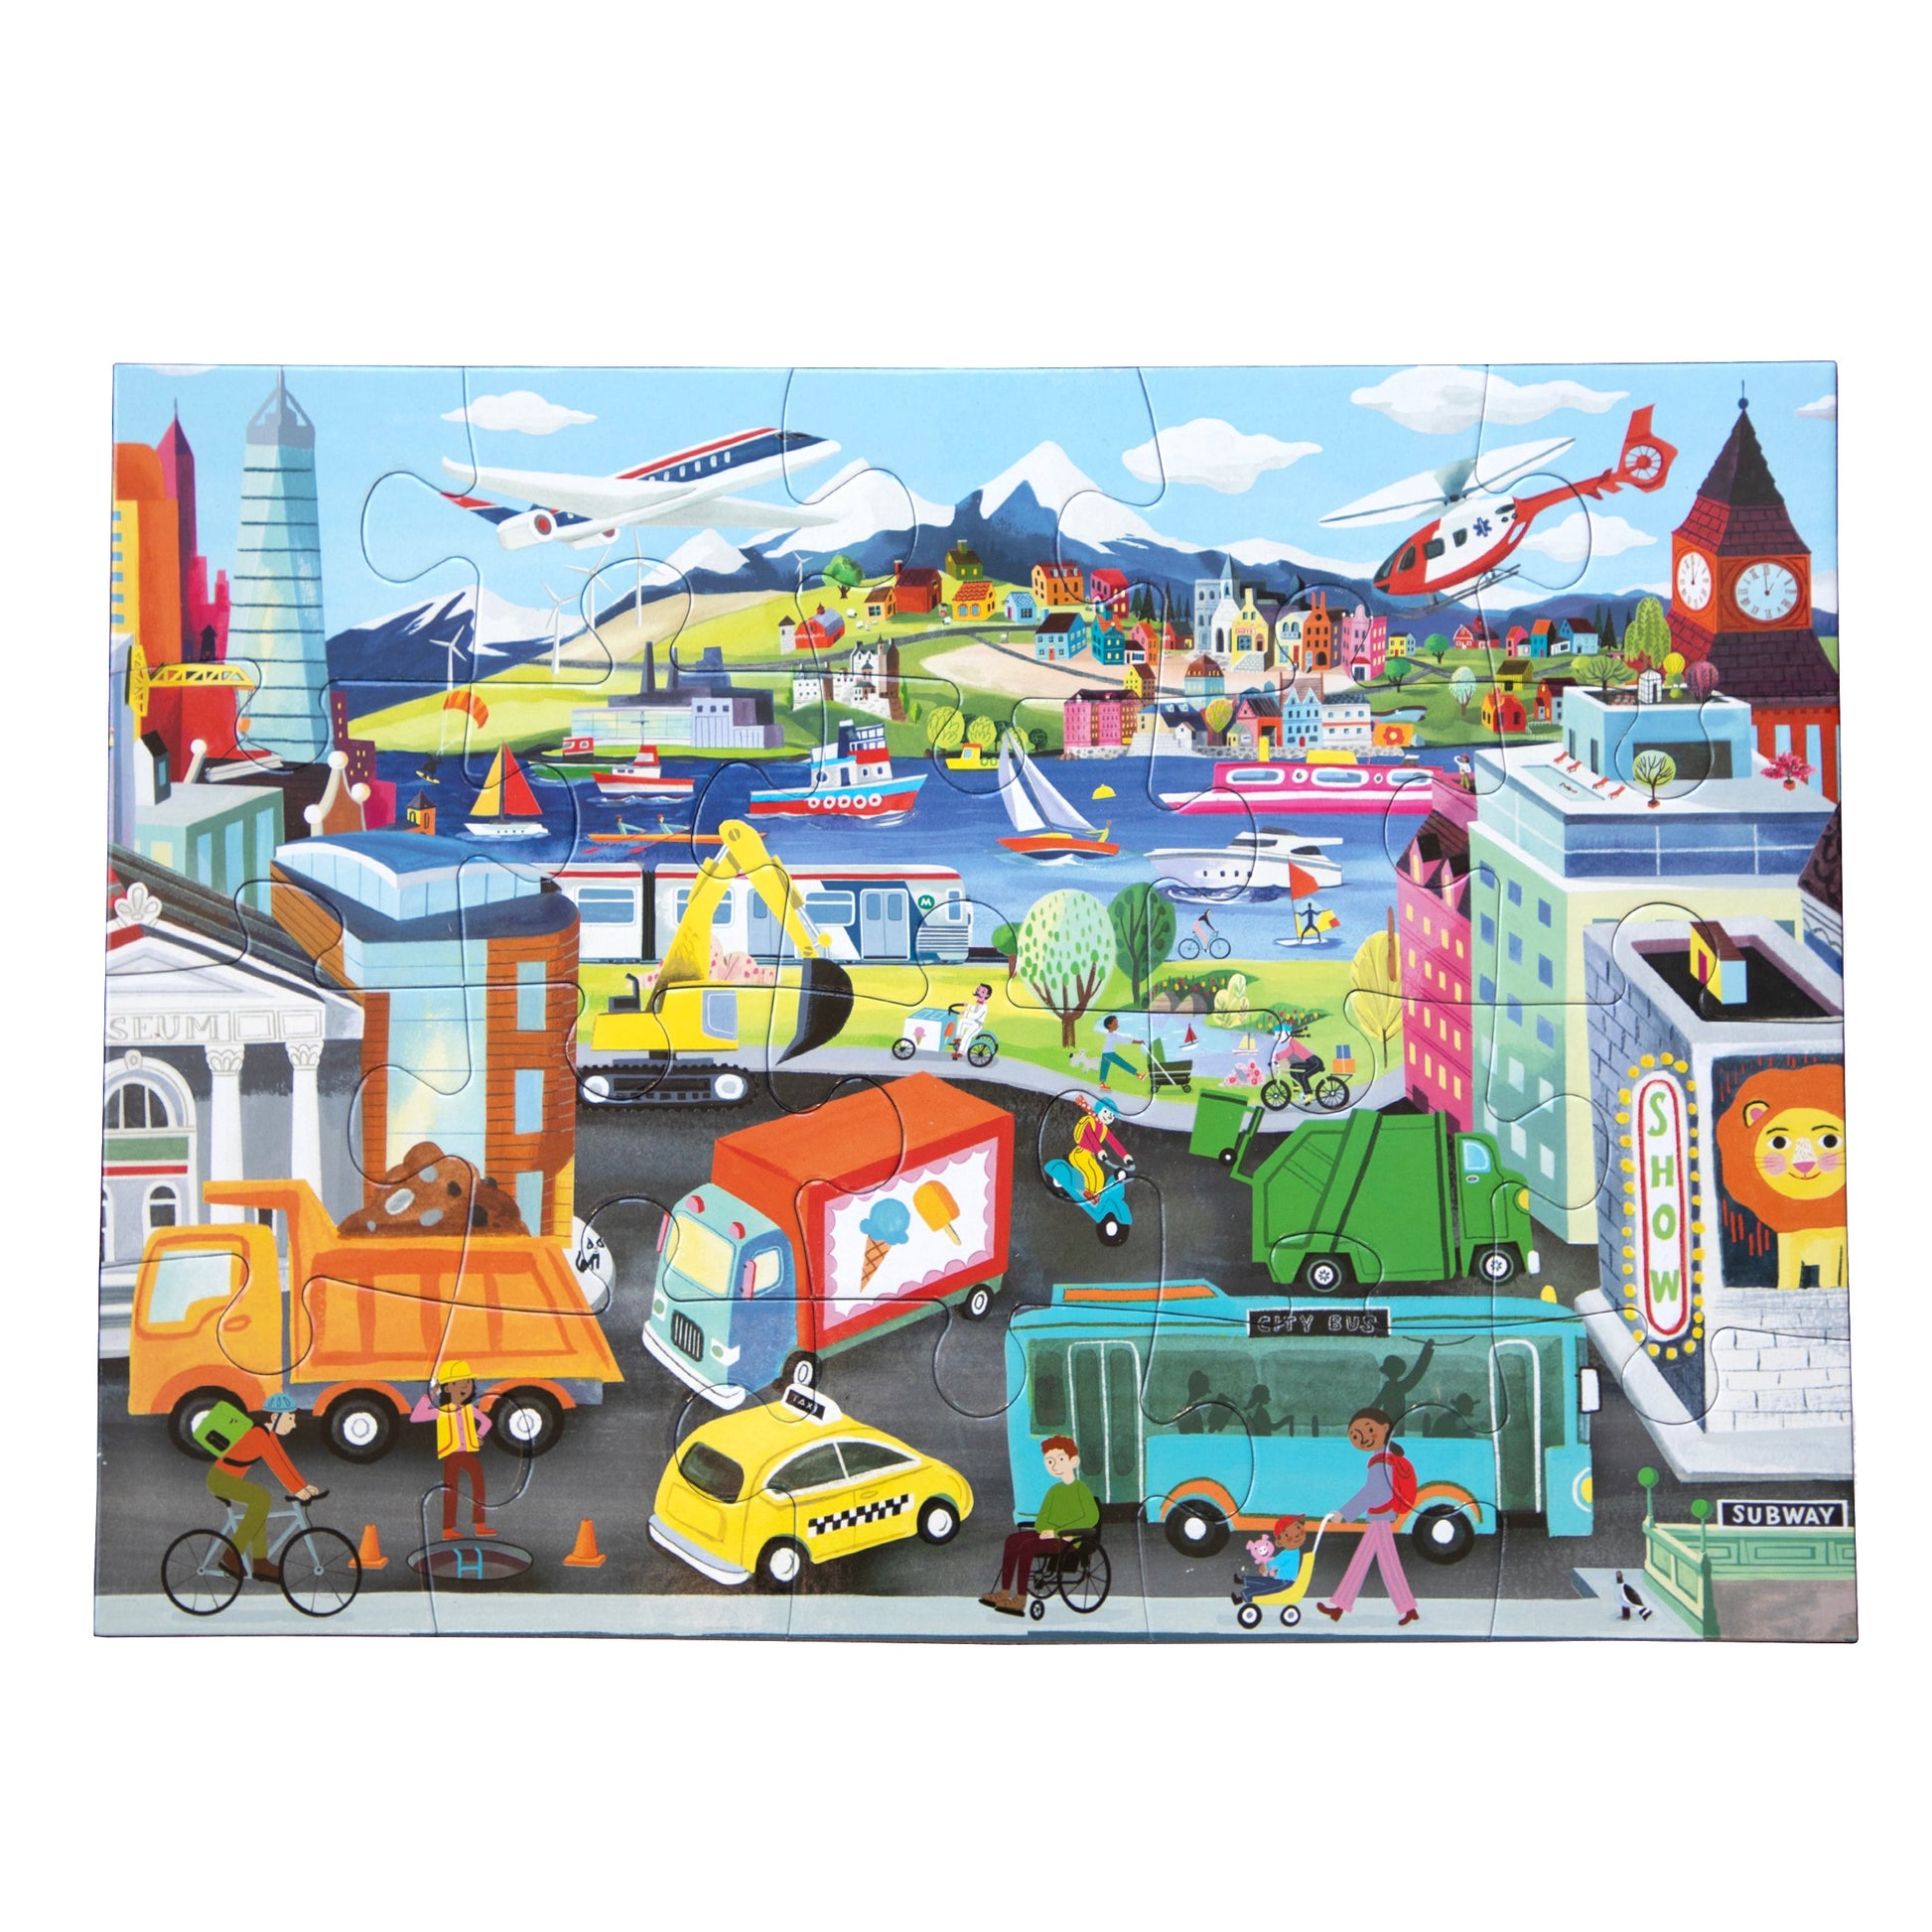 Vehicles 20 Piece Jigsaw Puzzle by eeBoo | Fun Unique Gifts for Kids 3+ | Gifts for Boys & Girls